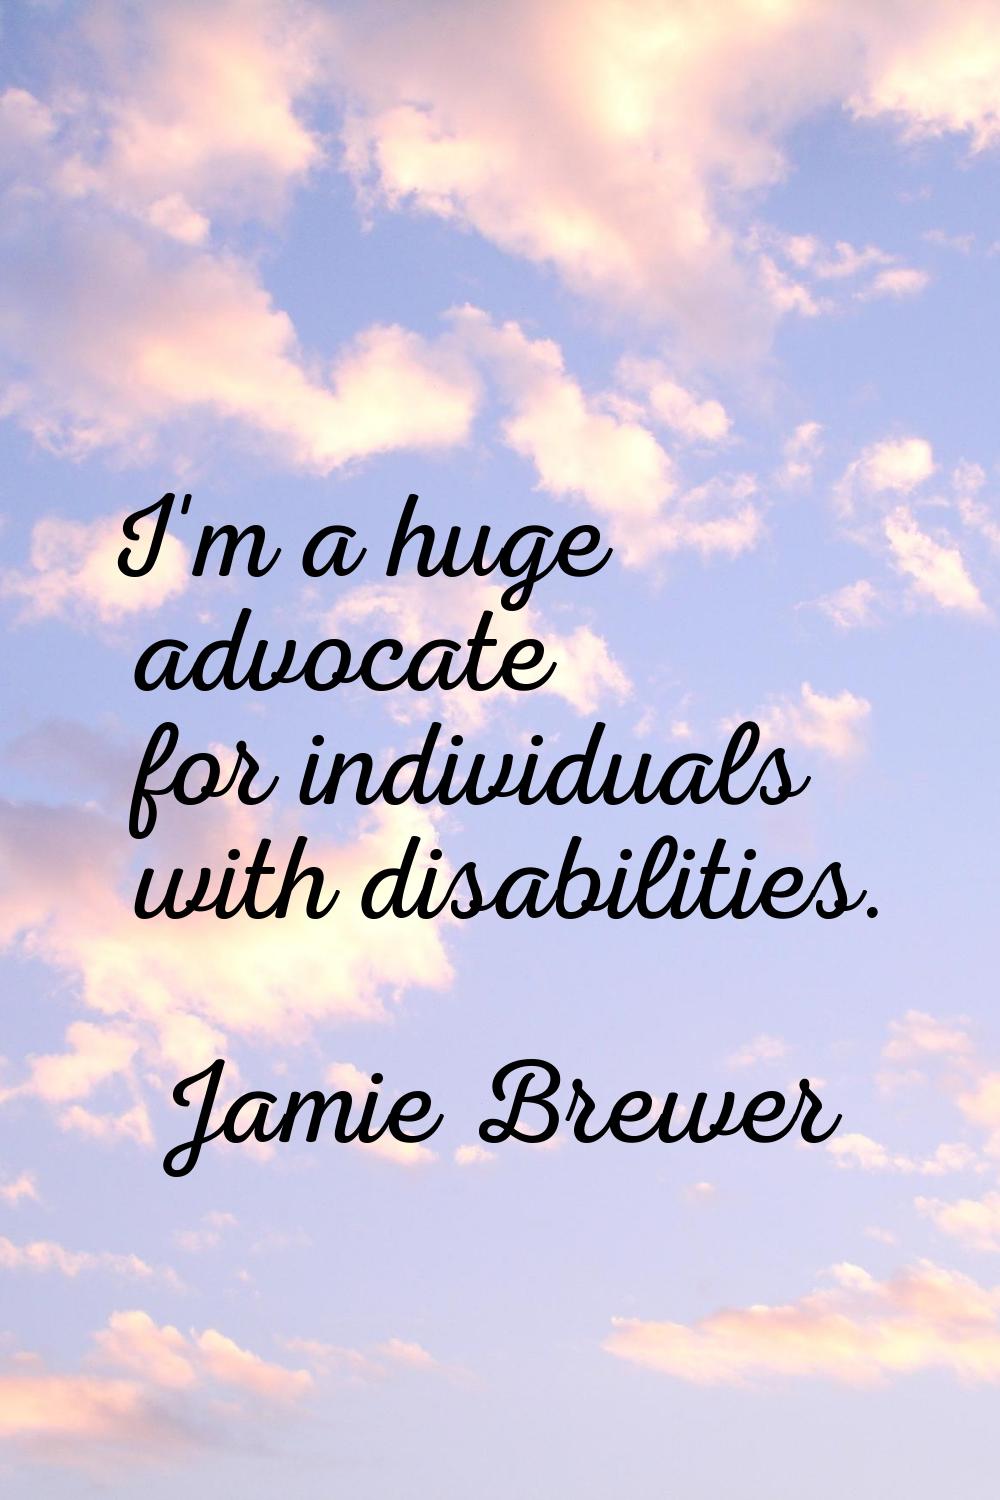 I'm a huge advocate for individuals with disabilities.